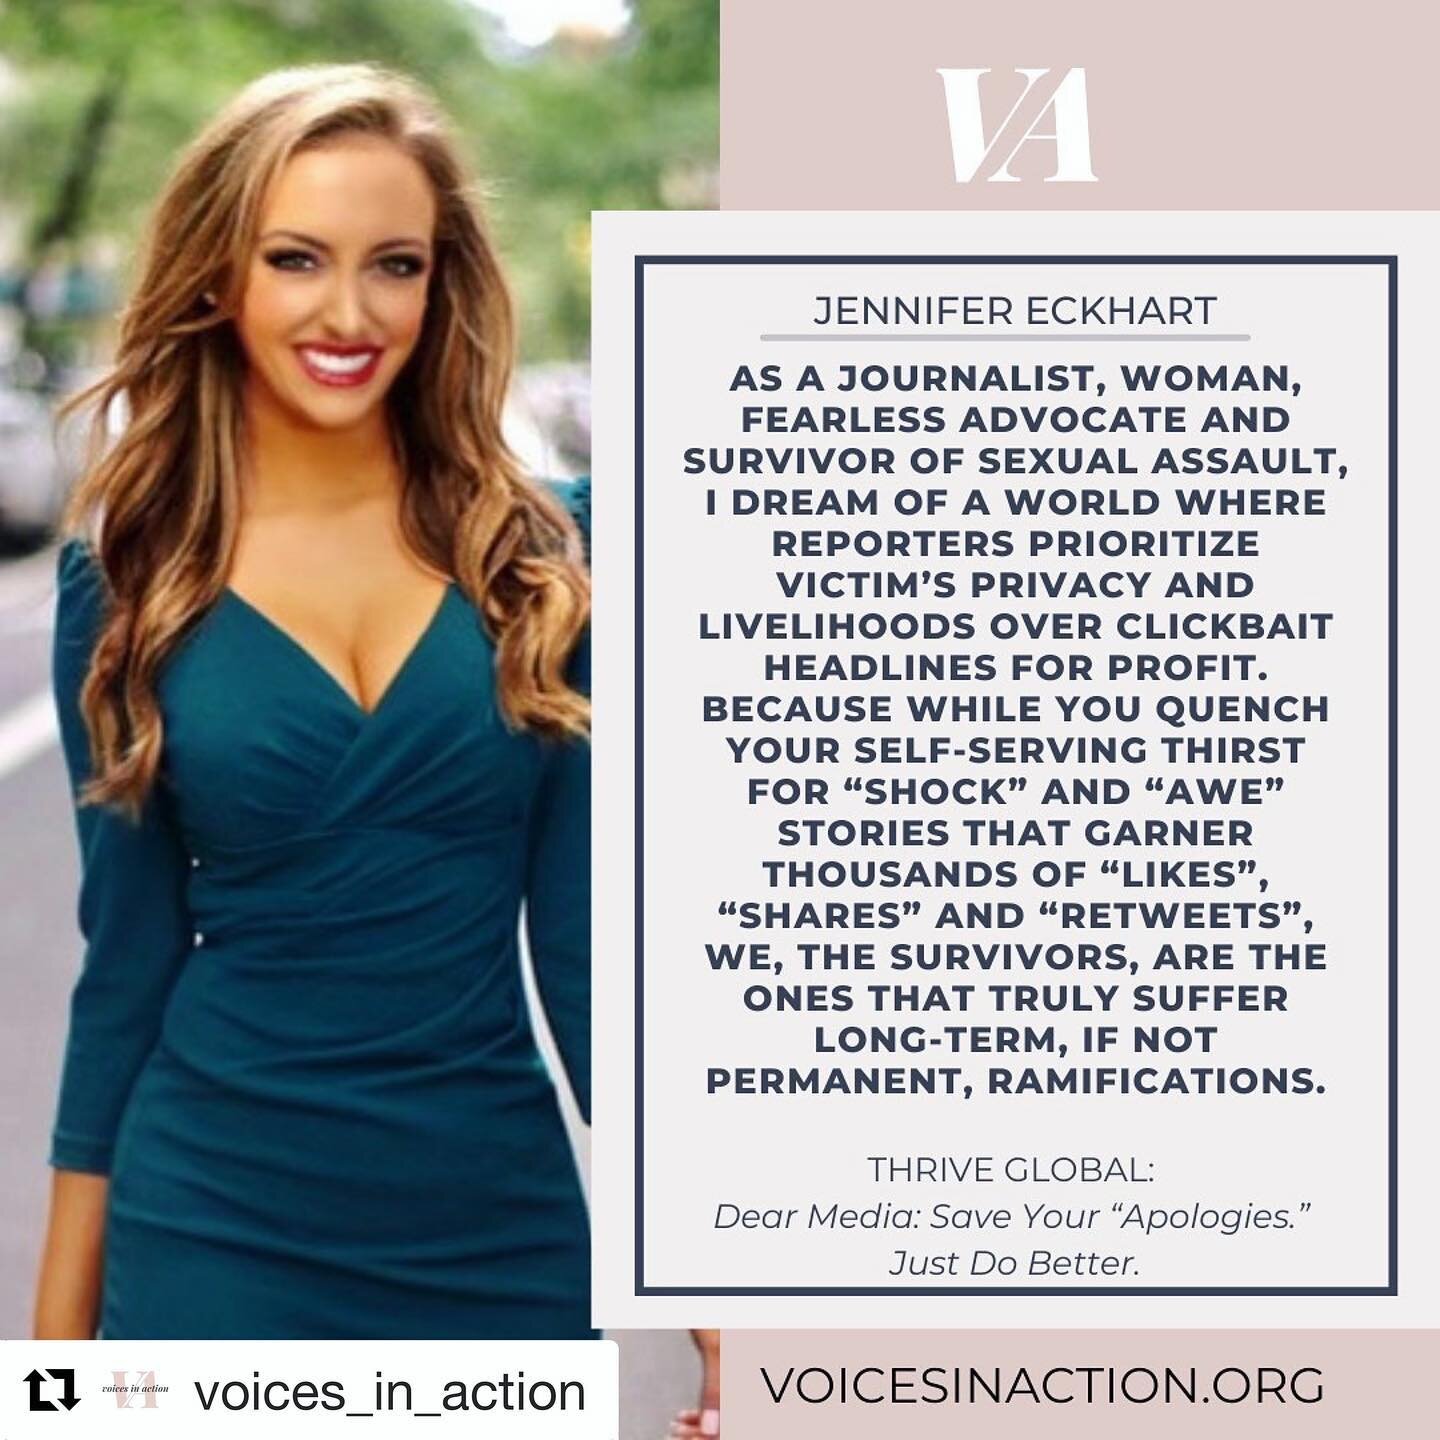 &ldquo;I have always believed that when you have a voice, you have an obligation to use that voice to empower others.&rdquo; Thank you @voices_in_action for featuring me &amp; my important words re: holding the media accountable. Your voice is your s